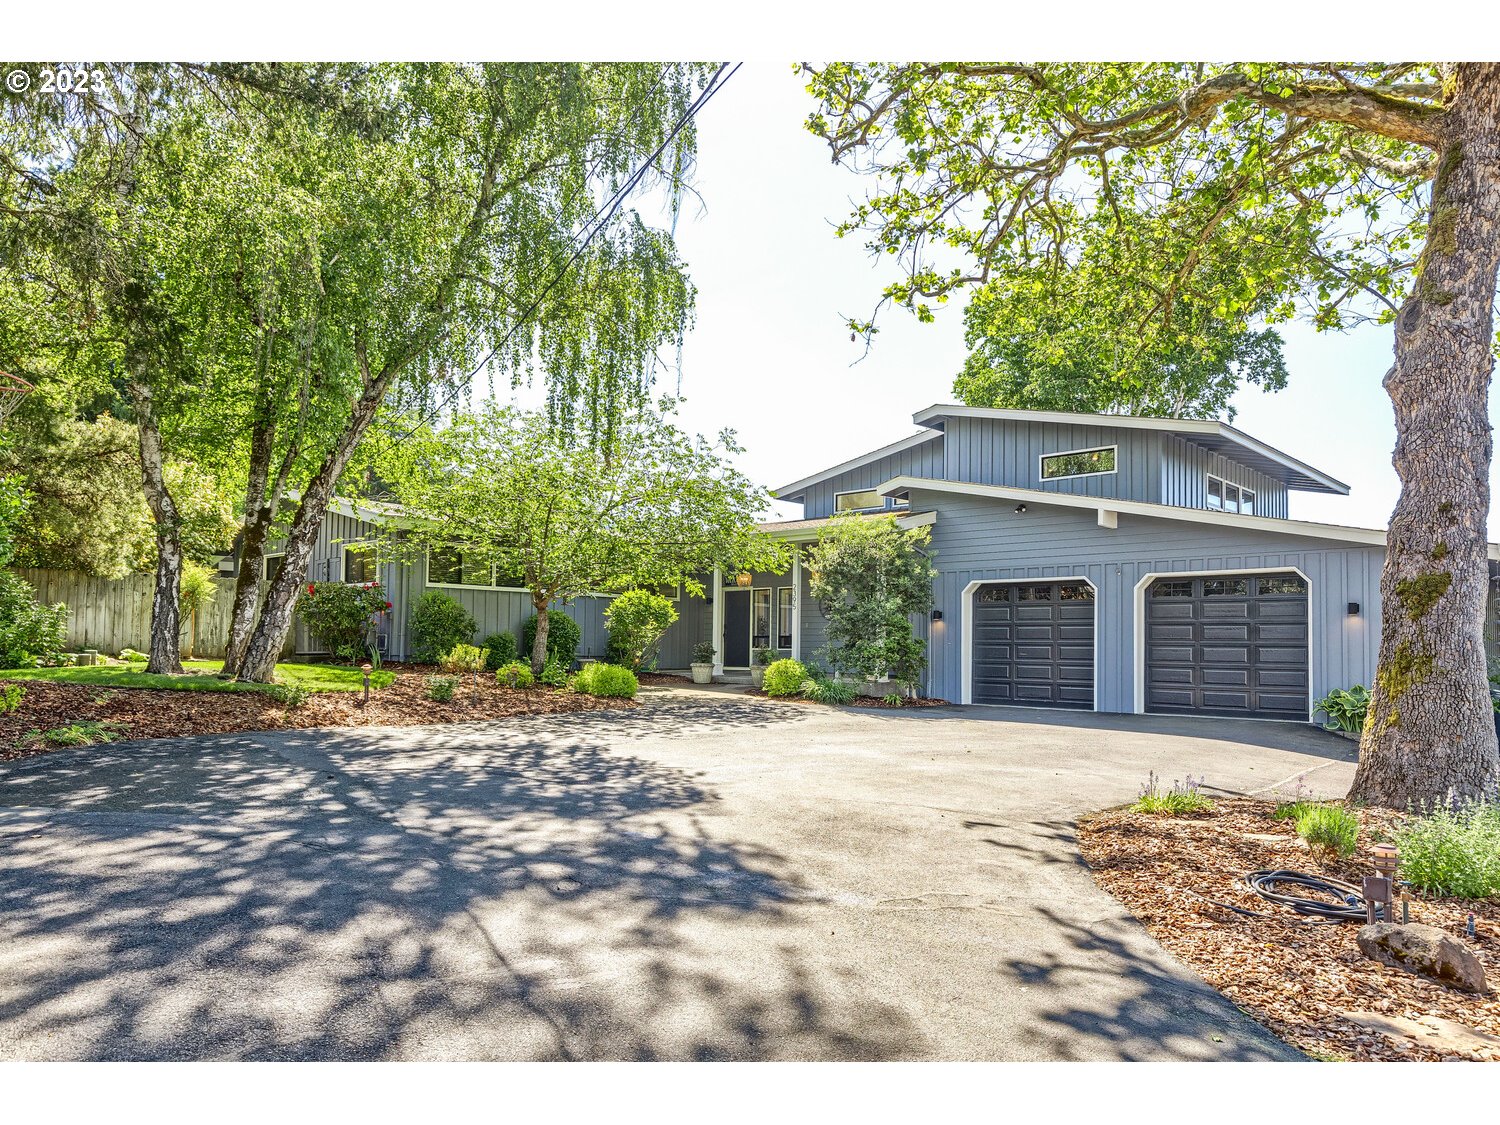 2395 SCOVILLE RD, Grants Pass, OR 